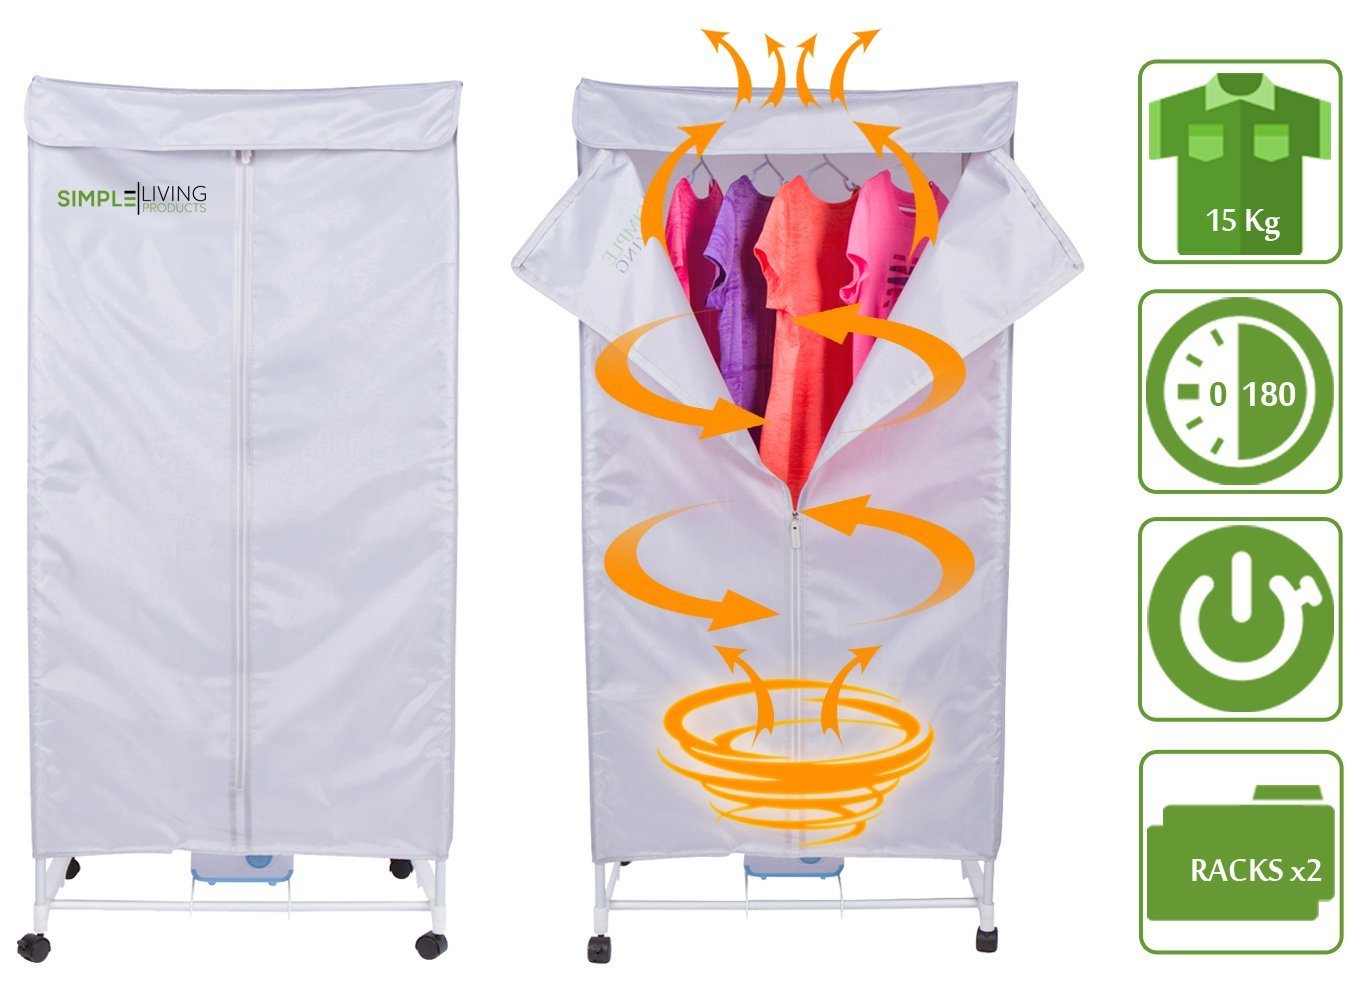 15KG Compact Electric Portable Clothing Dryer - Portable Clothes Dryer Rack Dries Clothing in 30 Minutes. Saves Time, Money and Space. Dries Everything. Use it Anywhere.